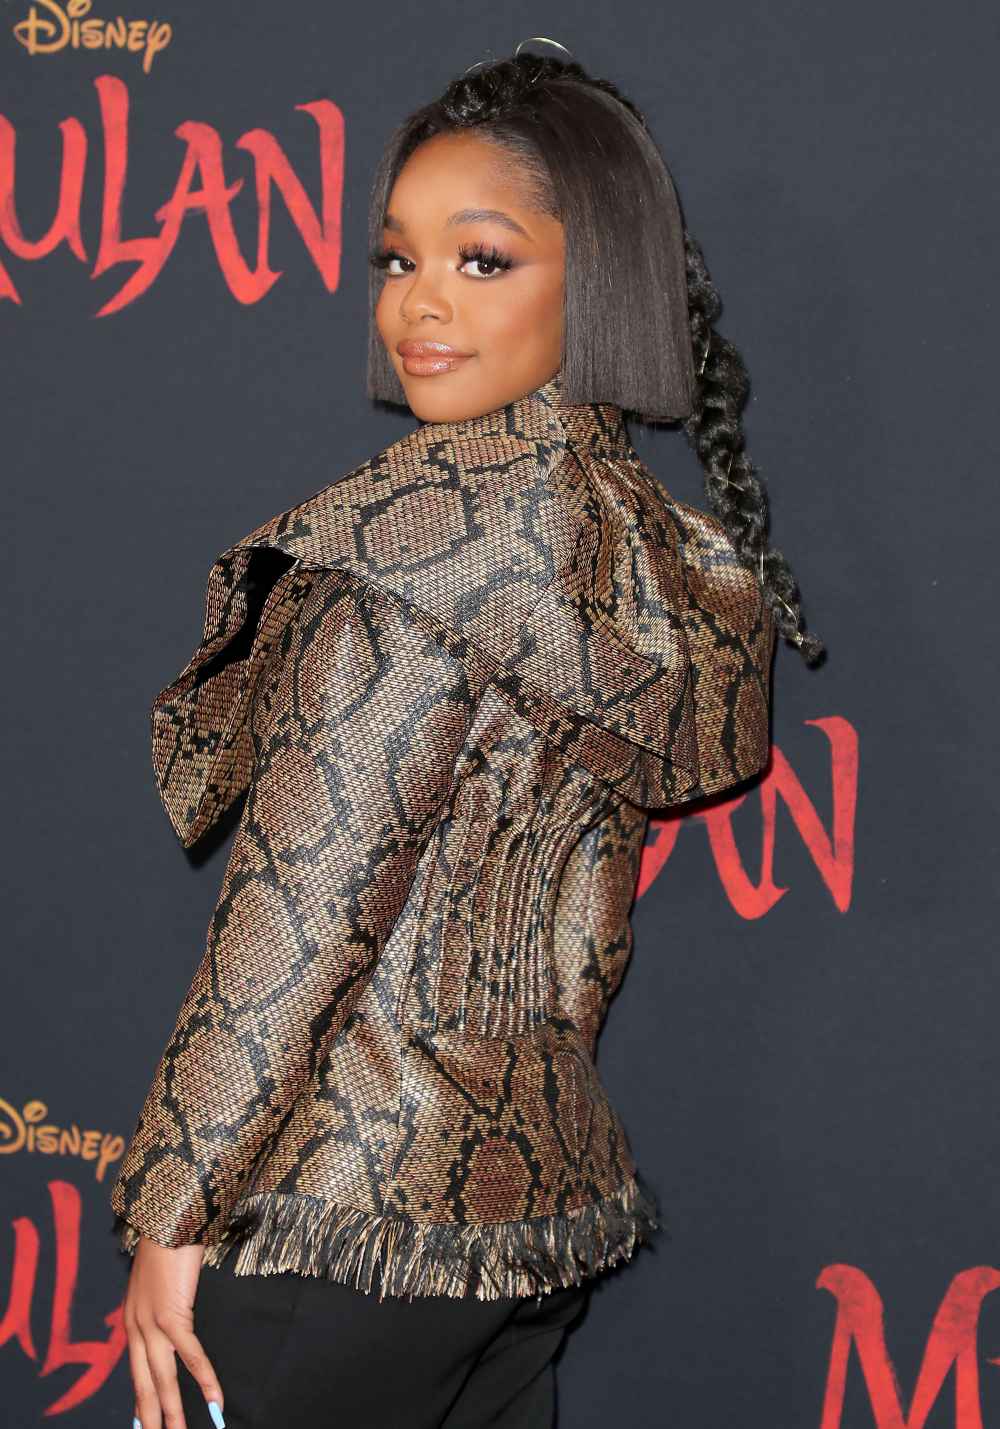 Black-ish' Star Marsai Martin Claps Back at Criticism Over Her BET Awards Look